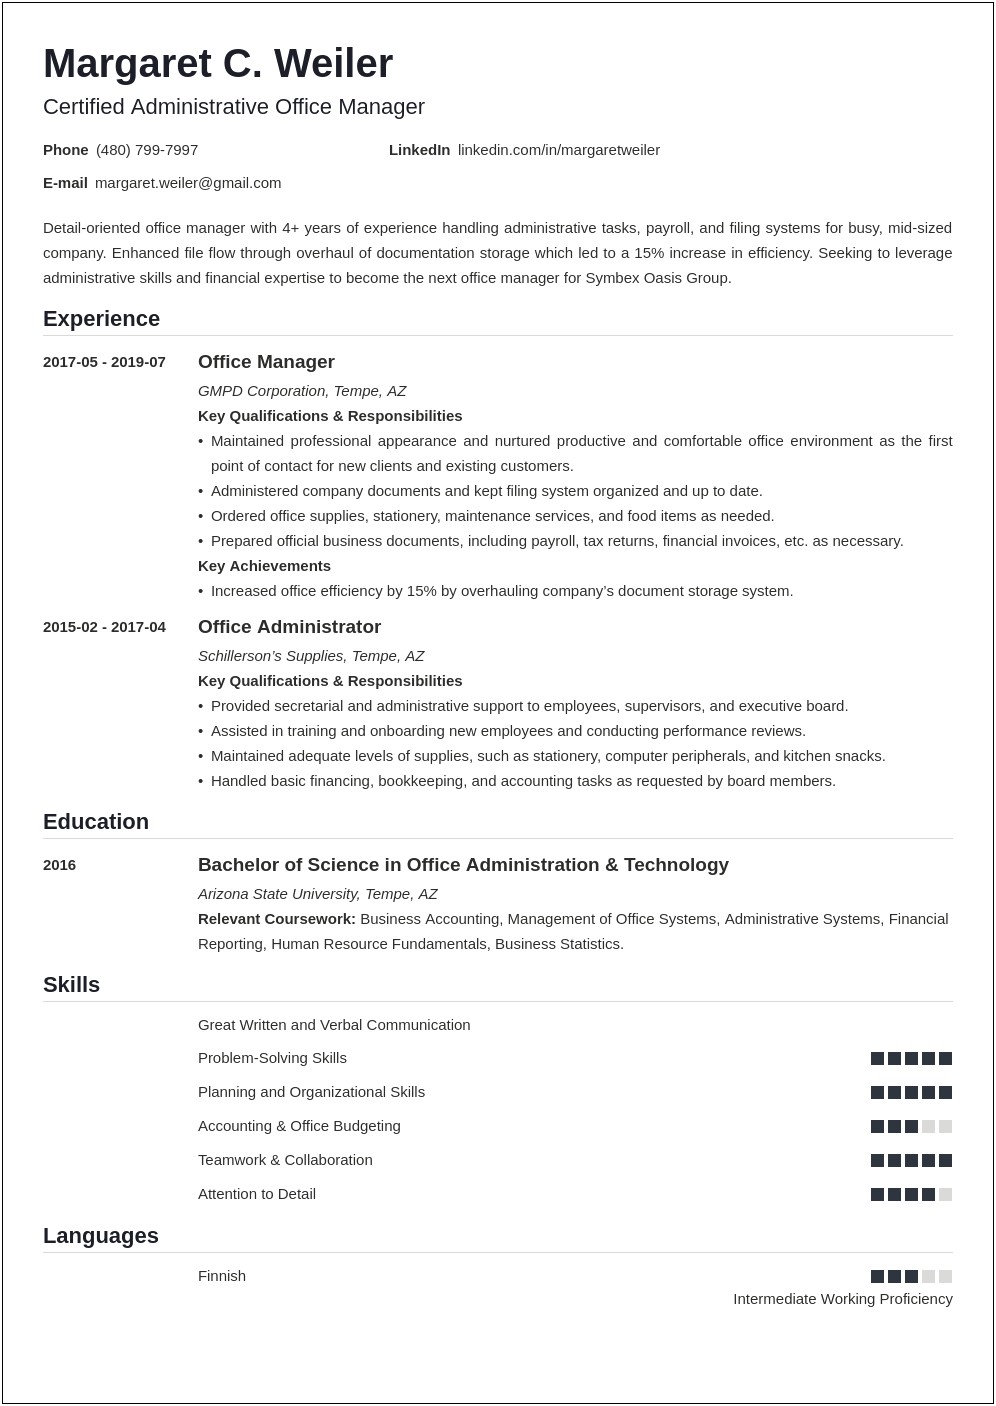 Professional Summary Resume Examples For Office Manager